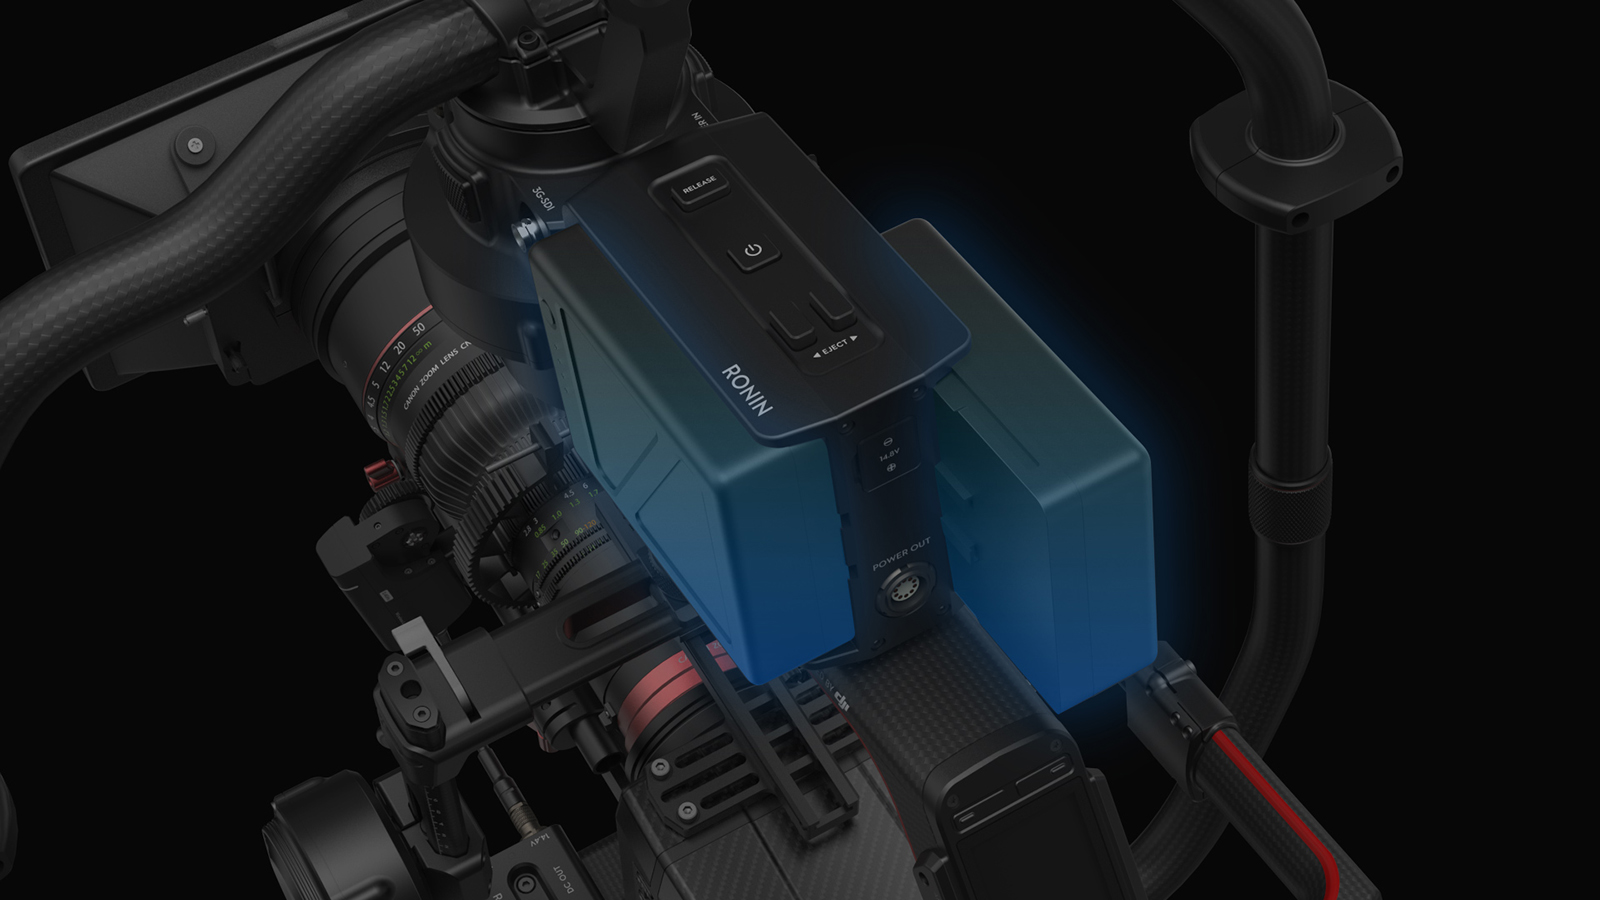 dji ronin 2 announced hot swappable batteries